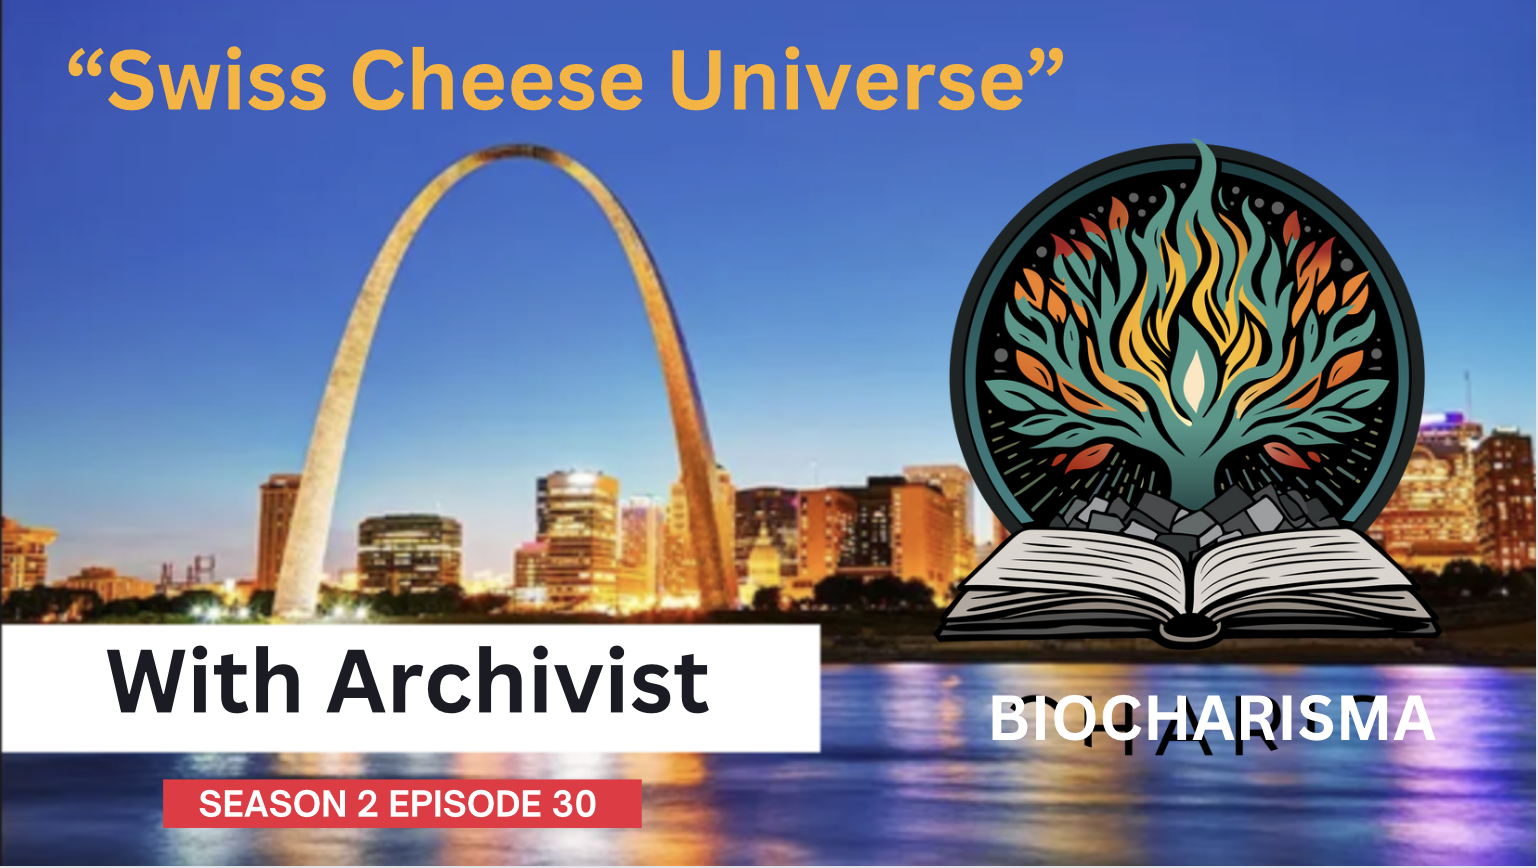 “SWISS CHEESE UNIVERSE” WITH ARCHIVIST